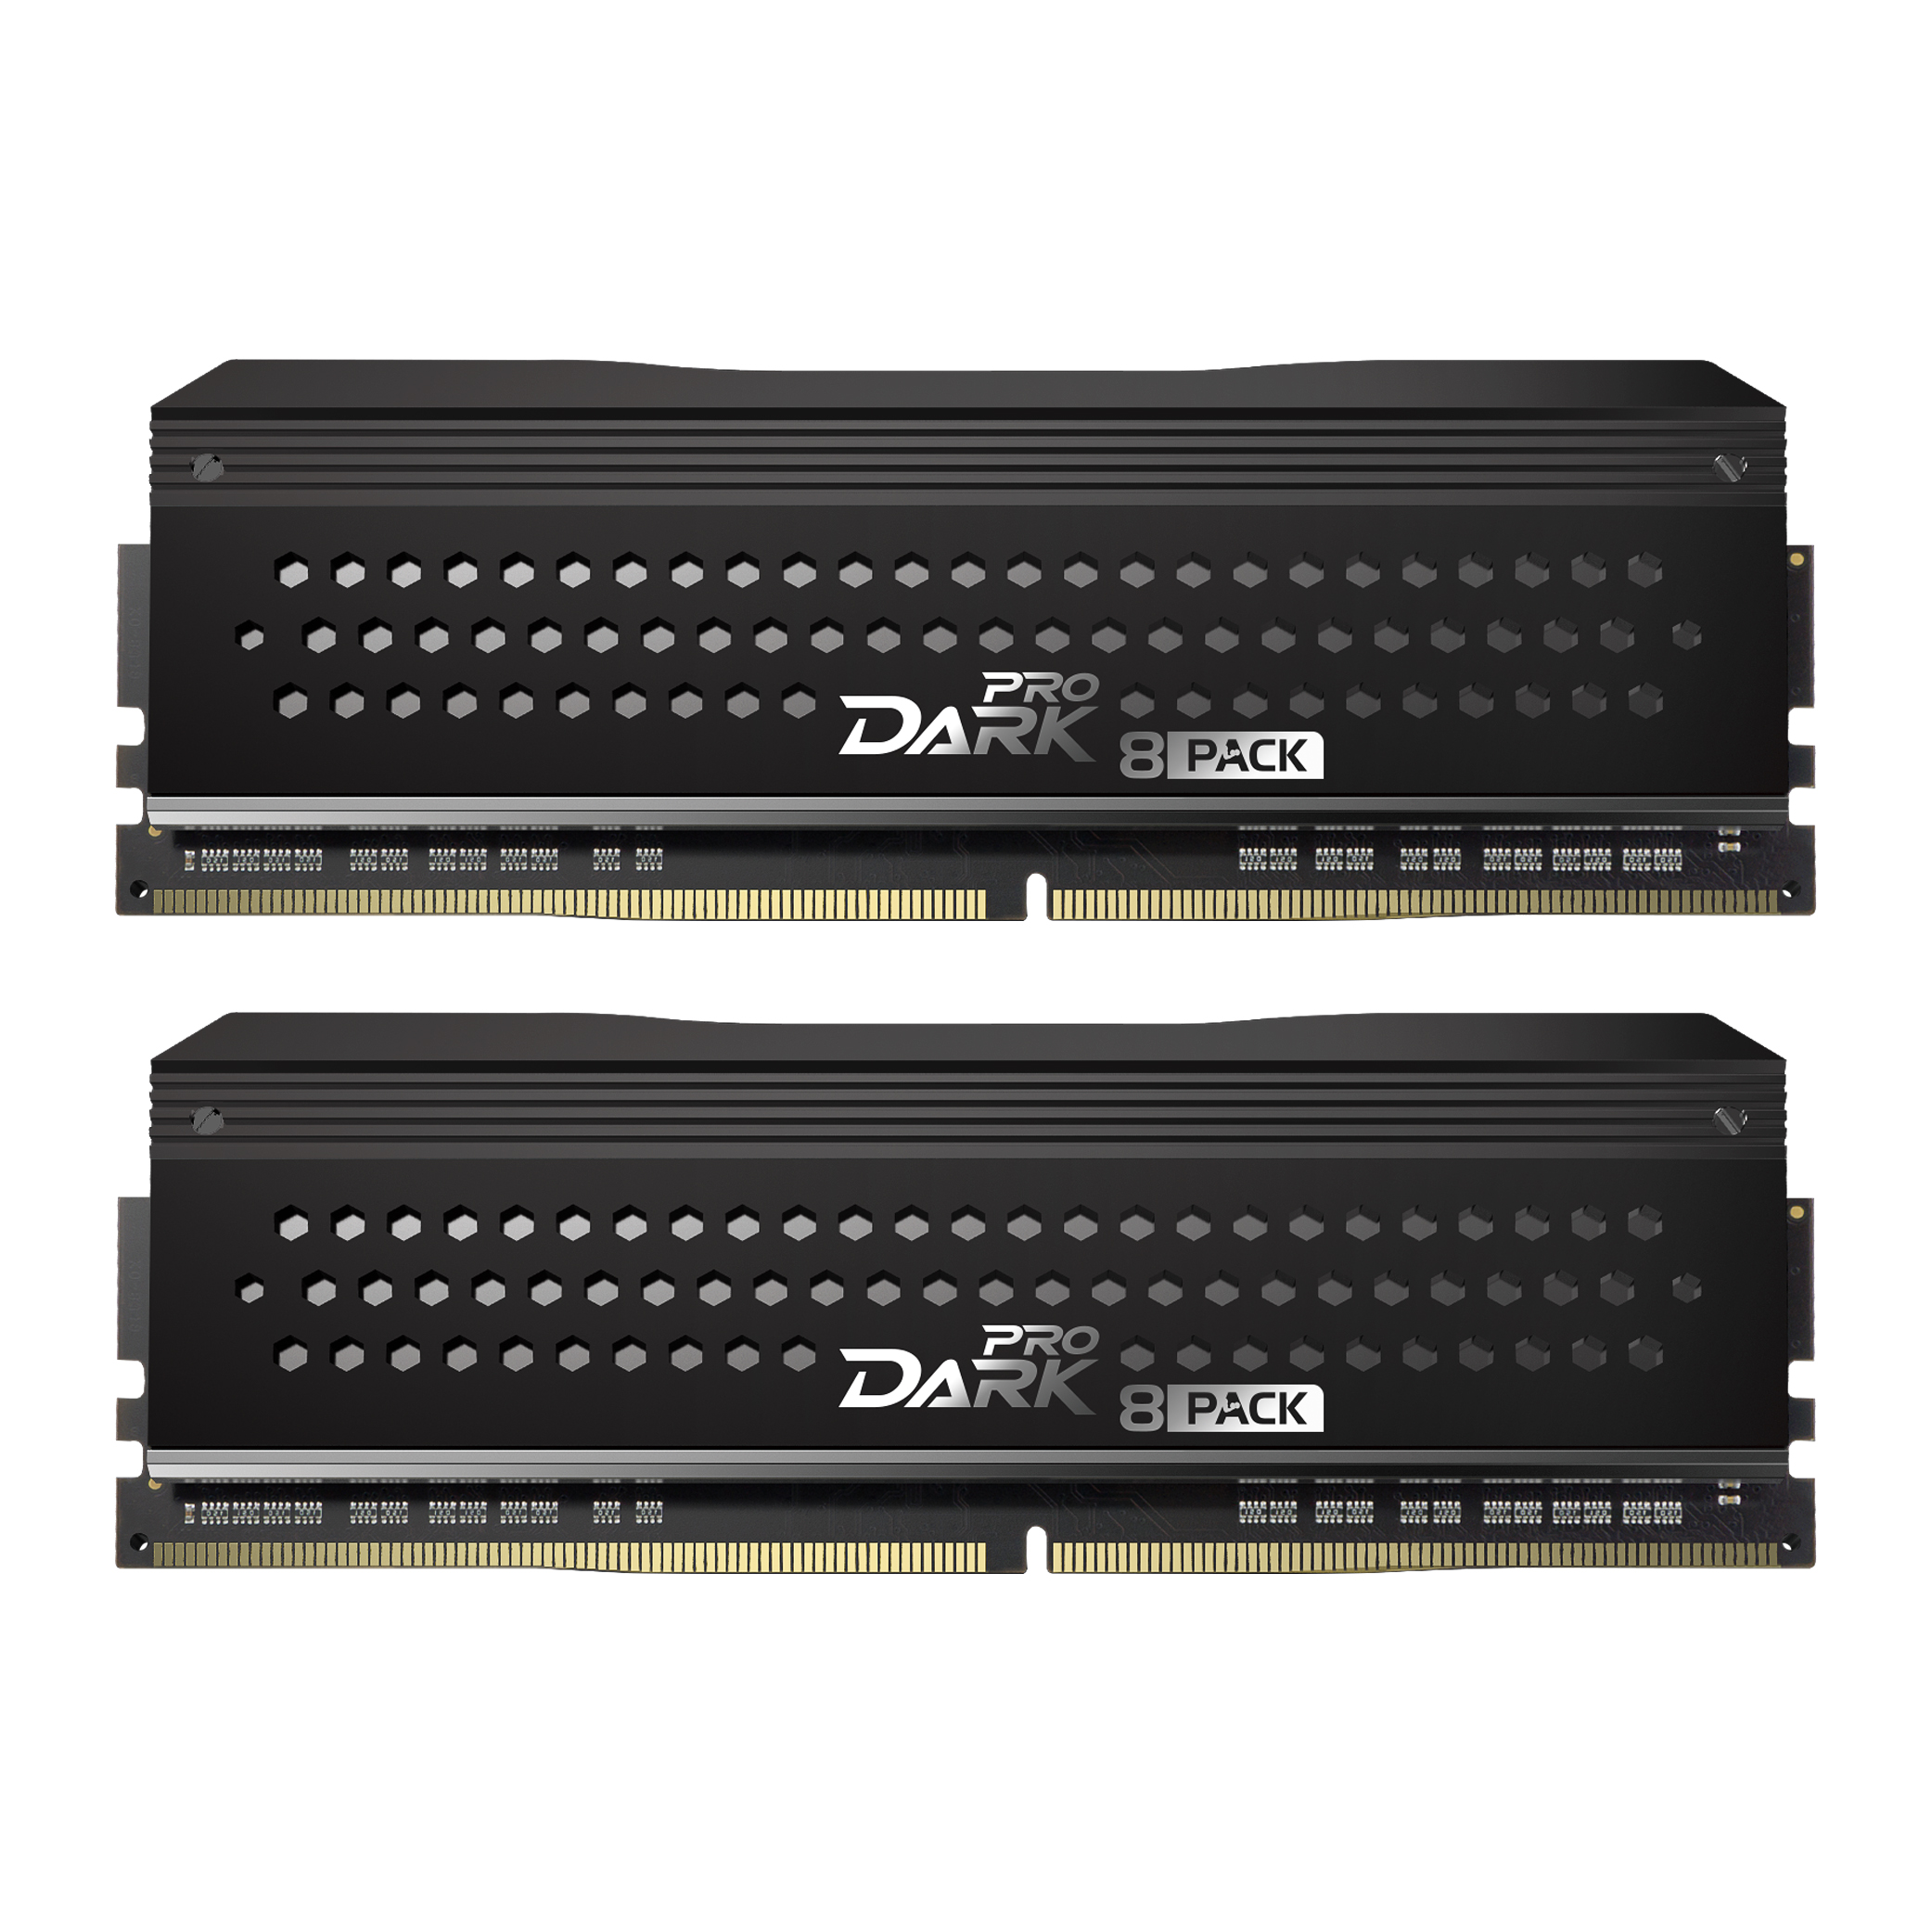 Team Group 8Pack Edition 16GB (2x8GB) DDR4 PC4-25600C14 3200MHz Dual Channe